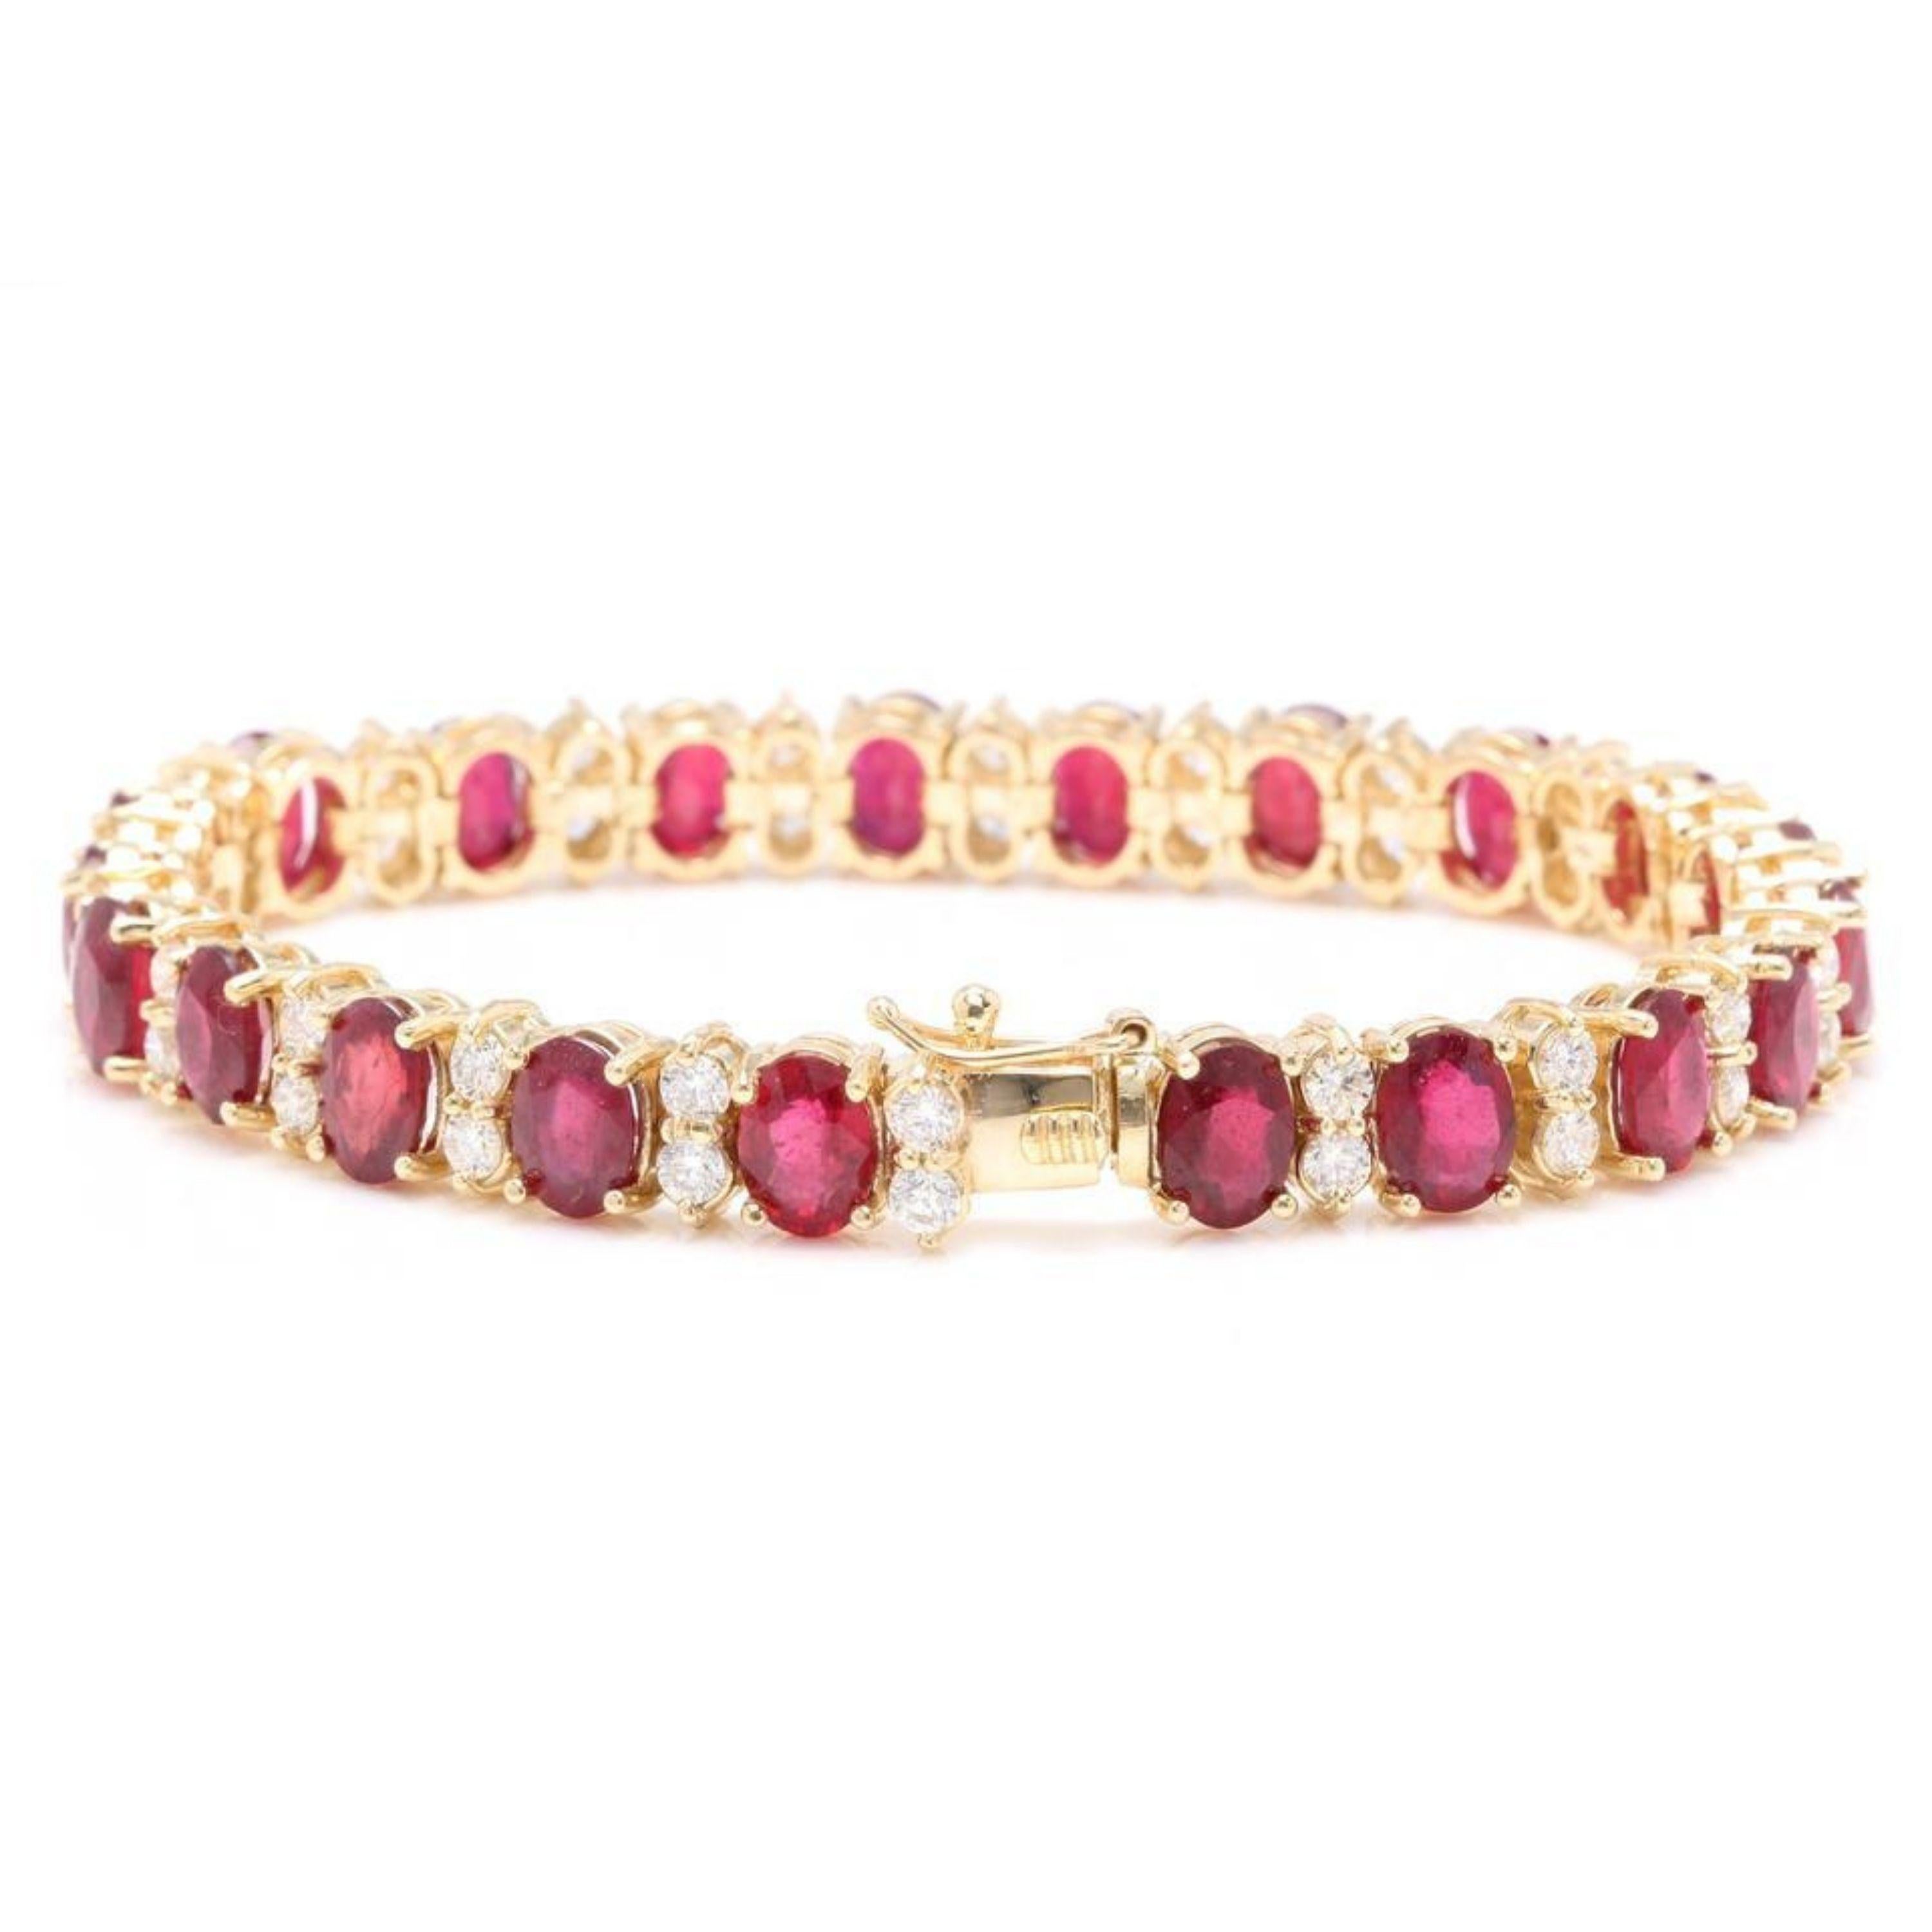 Very Beautiful 29.80 Carats Ruby & Natural Diamond 14K Solid Yellow Gold Bracelet

STAMPED: 14K


Total Natural Round Diamonds Weight: 3.80 Carats (color G-H / Clarity SI1-SI2)

Total Natural Ruby Weight is: 26.00 carats (Lead Glass